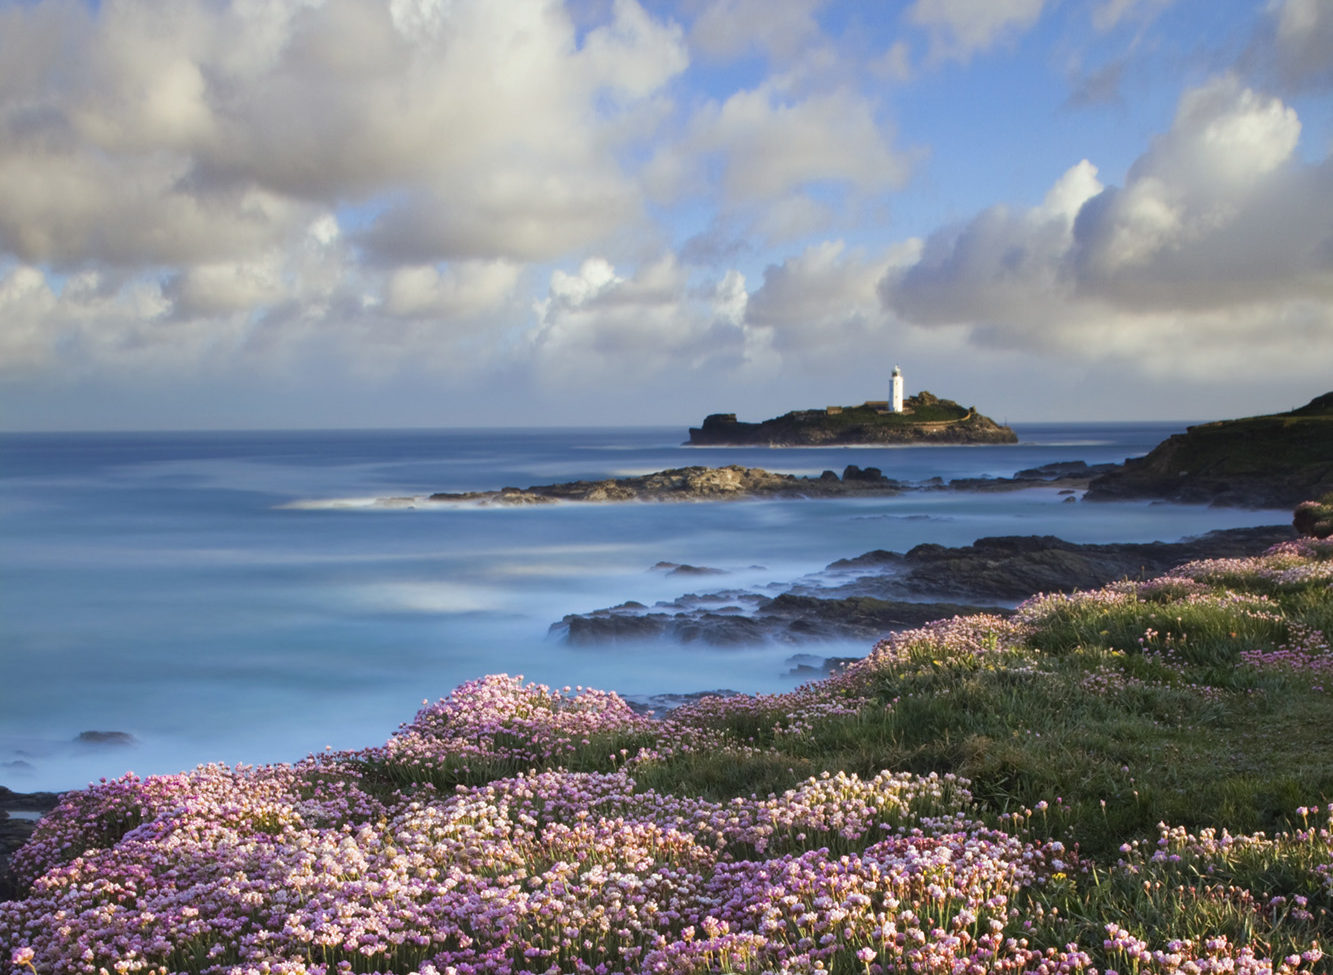 On the rockier ground of Godrevy Point a mass of thrift comes into flower during May. Credit: David Chapman